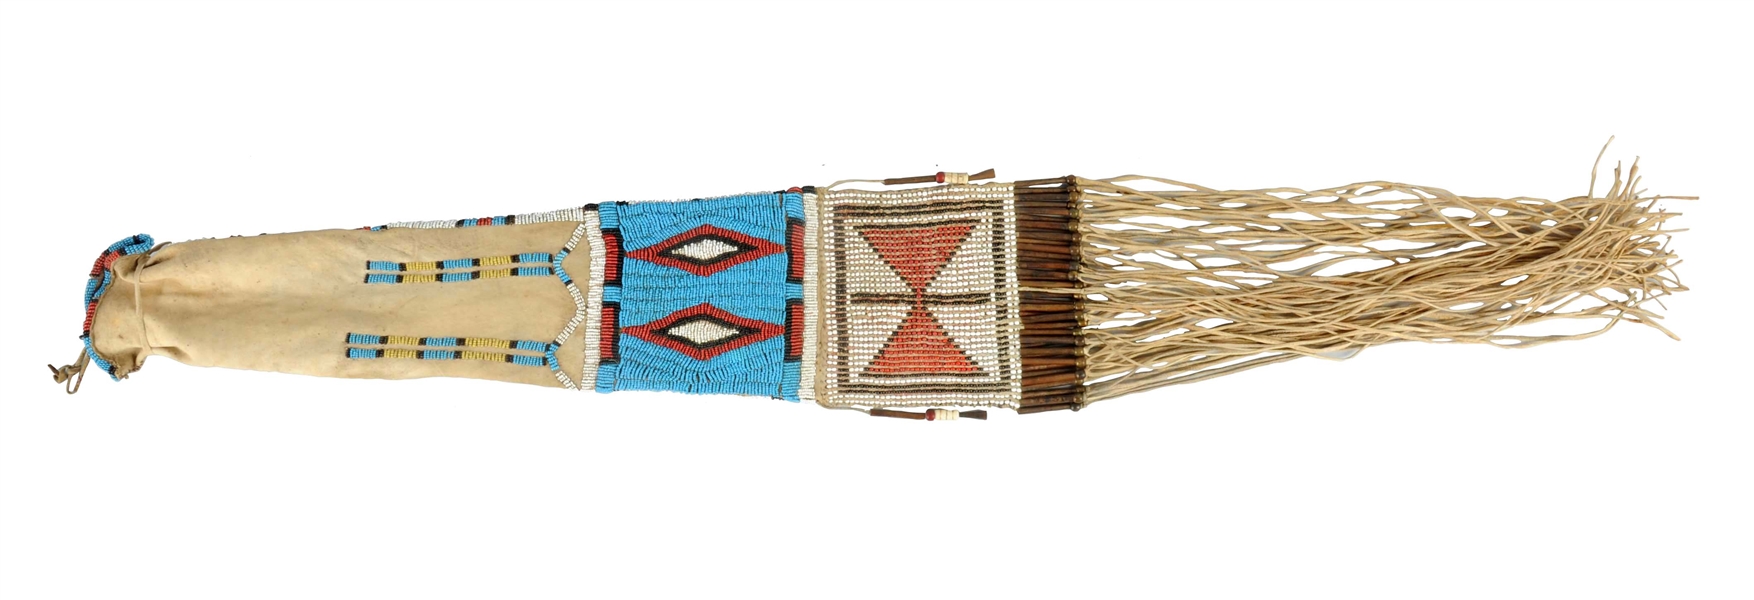 BEAUTIFUL NORTHERN PLAINS CONTOUR BEADED PIPE BAG WITH TWO DISTINCT DIAMOND ELEMENTS.